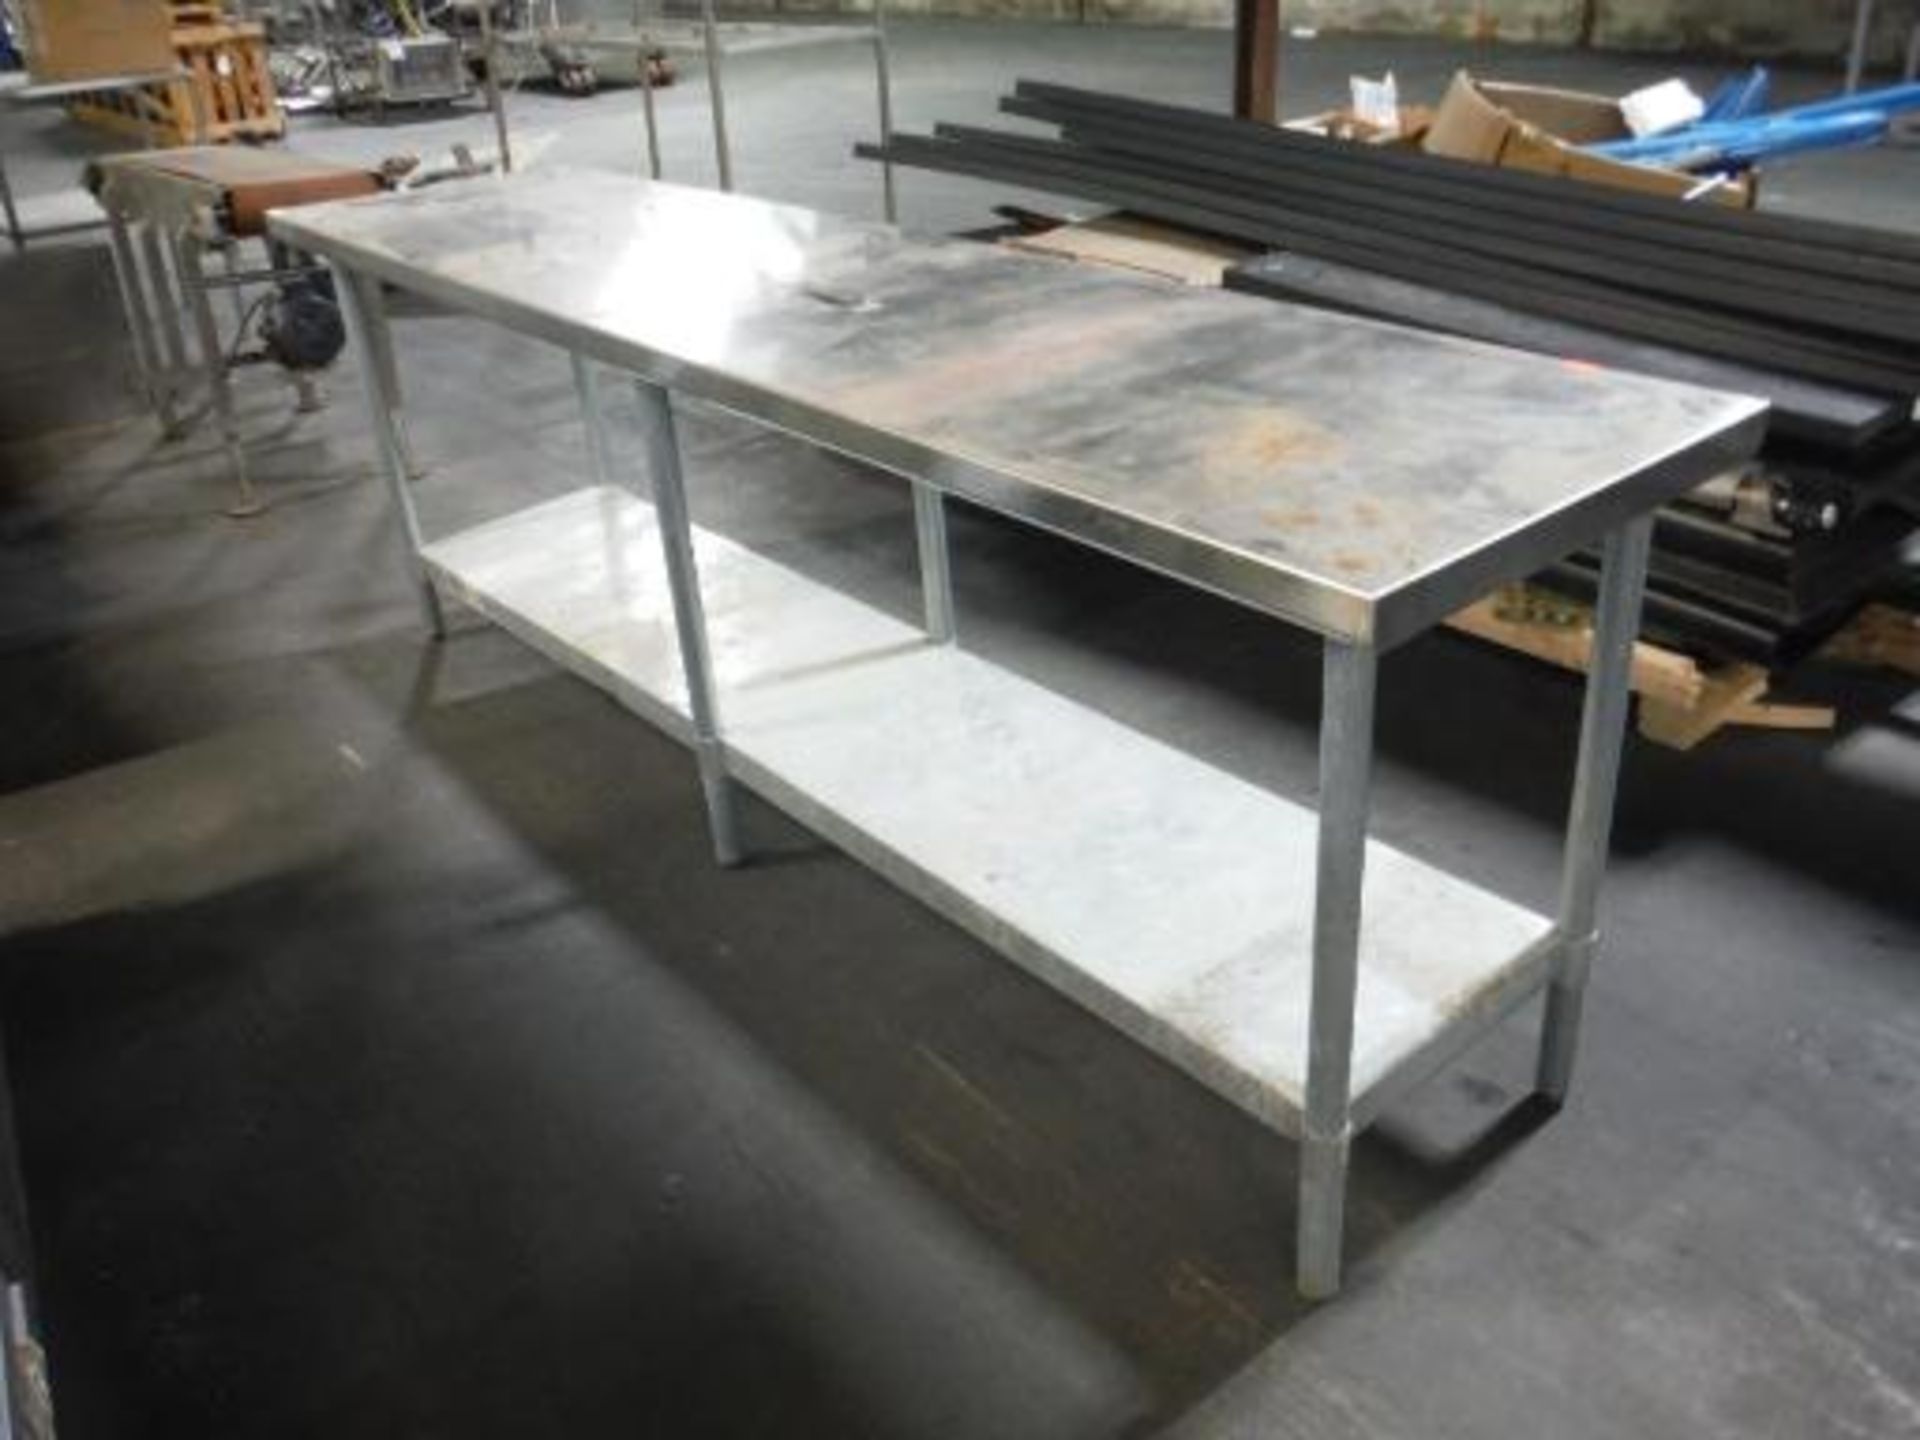 SS table top, 96 in. long x 24 in. wide x 34 in. tall, galvanized frame This item is located in